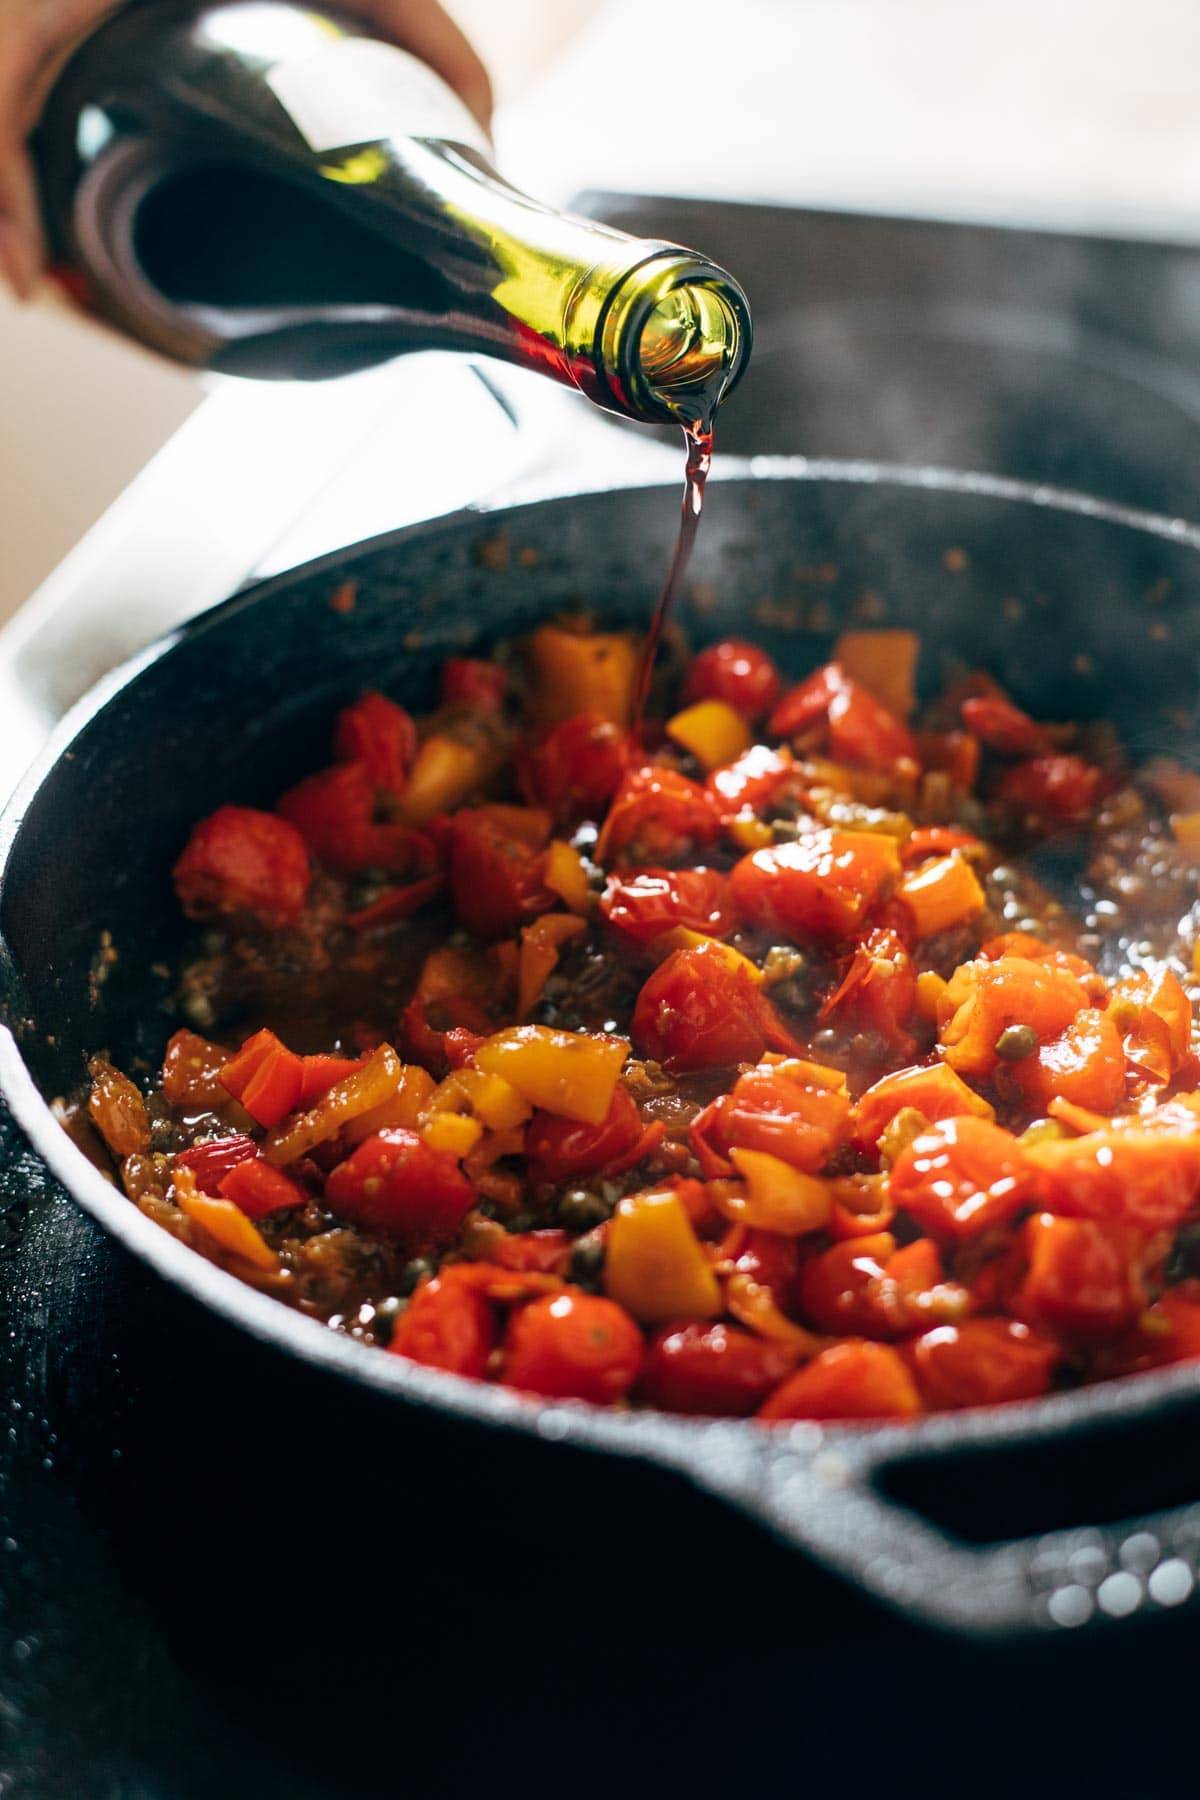 Adding wine to skillet of peppers and tomatoes.